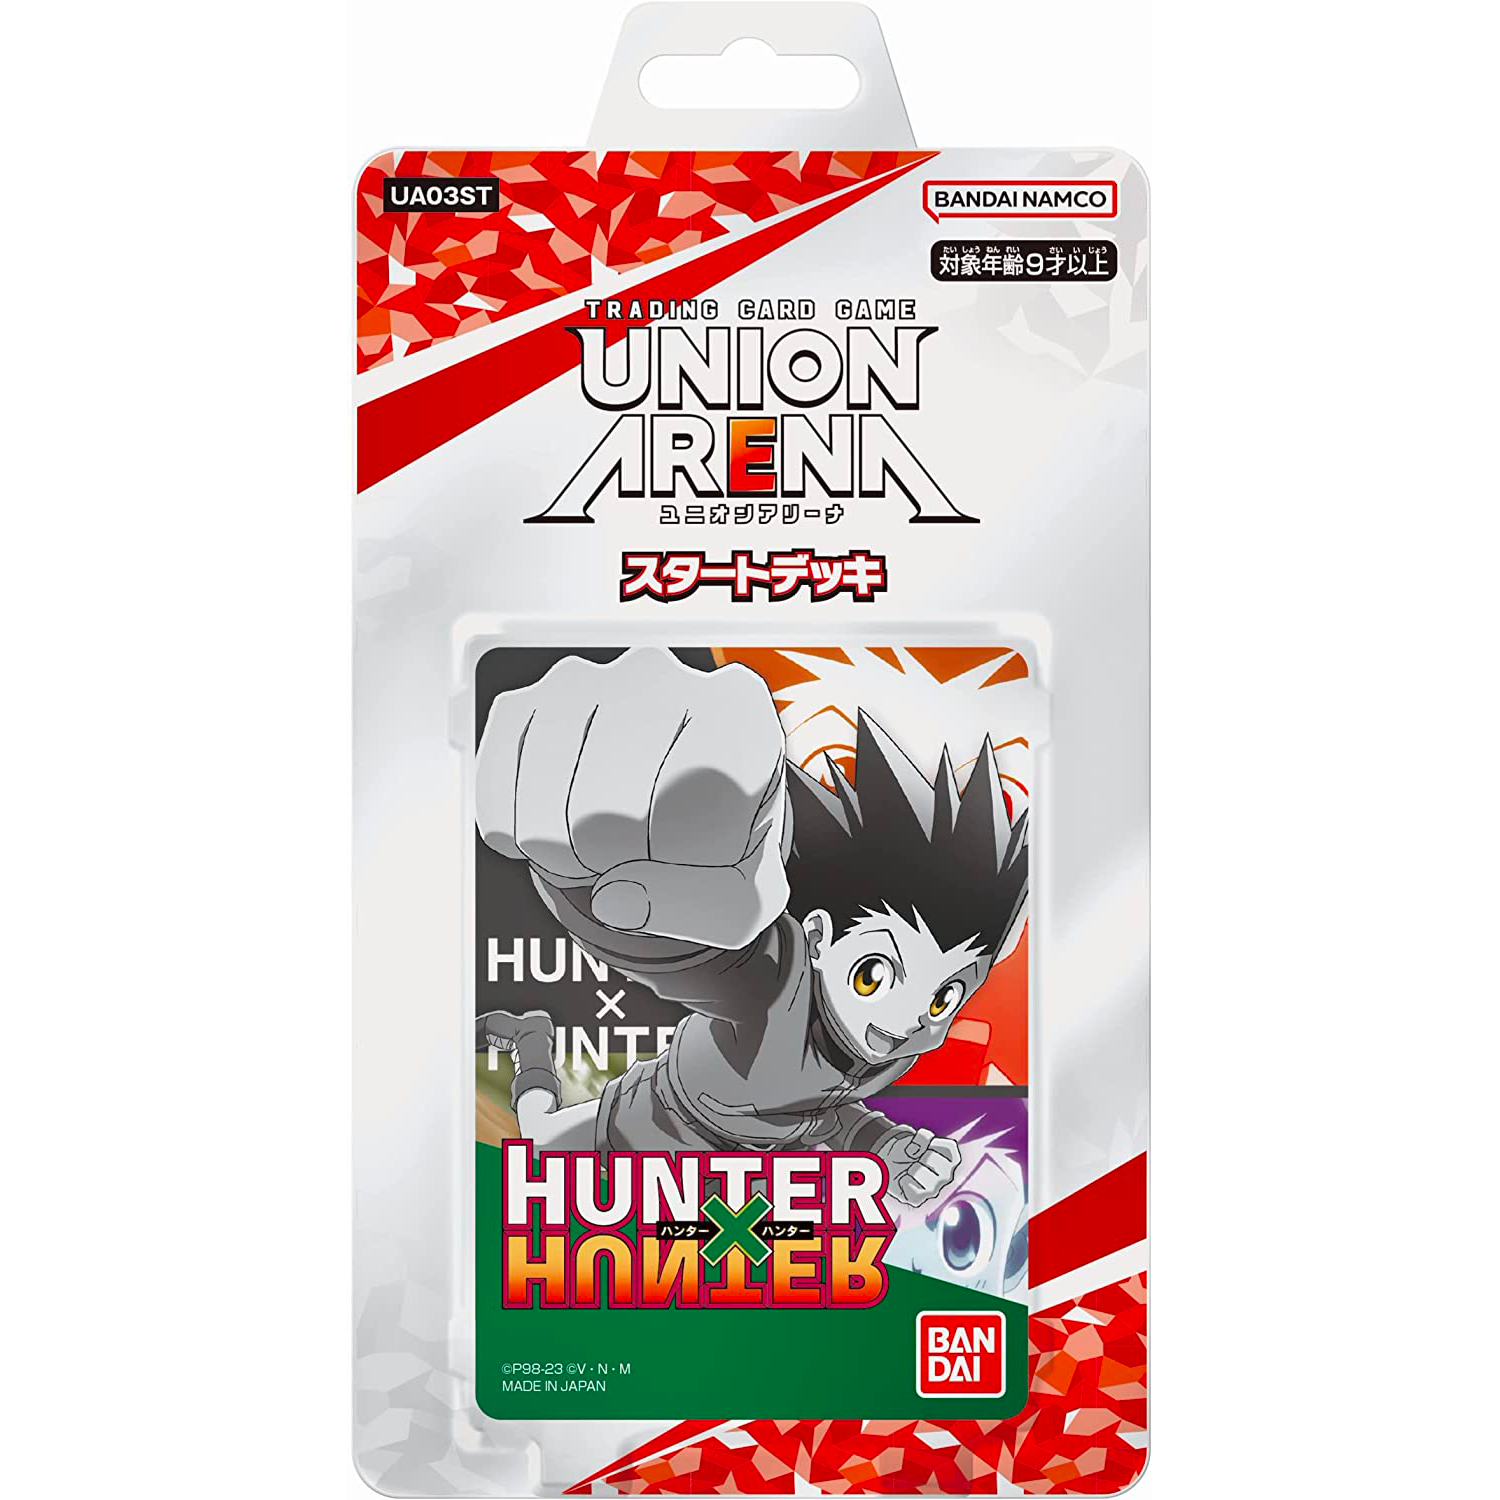 TRADING CARD GAME UNION ARENA STARTER DECK [UA03ST] HUNTER×HUNTER  Release date: March 24 2023      Pre-constructed deck: 50 cards (18 types in total)     Action Point card: 3 pieces     Play sheet: 1 sheet